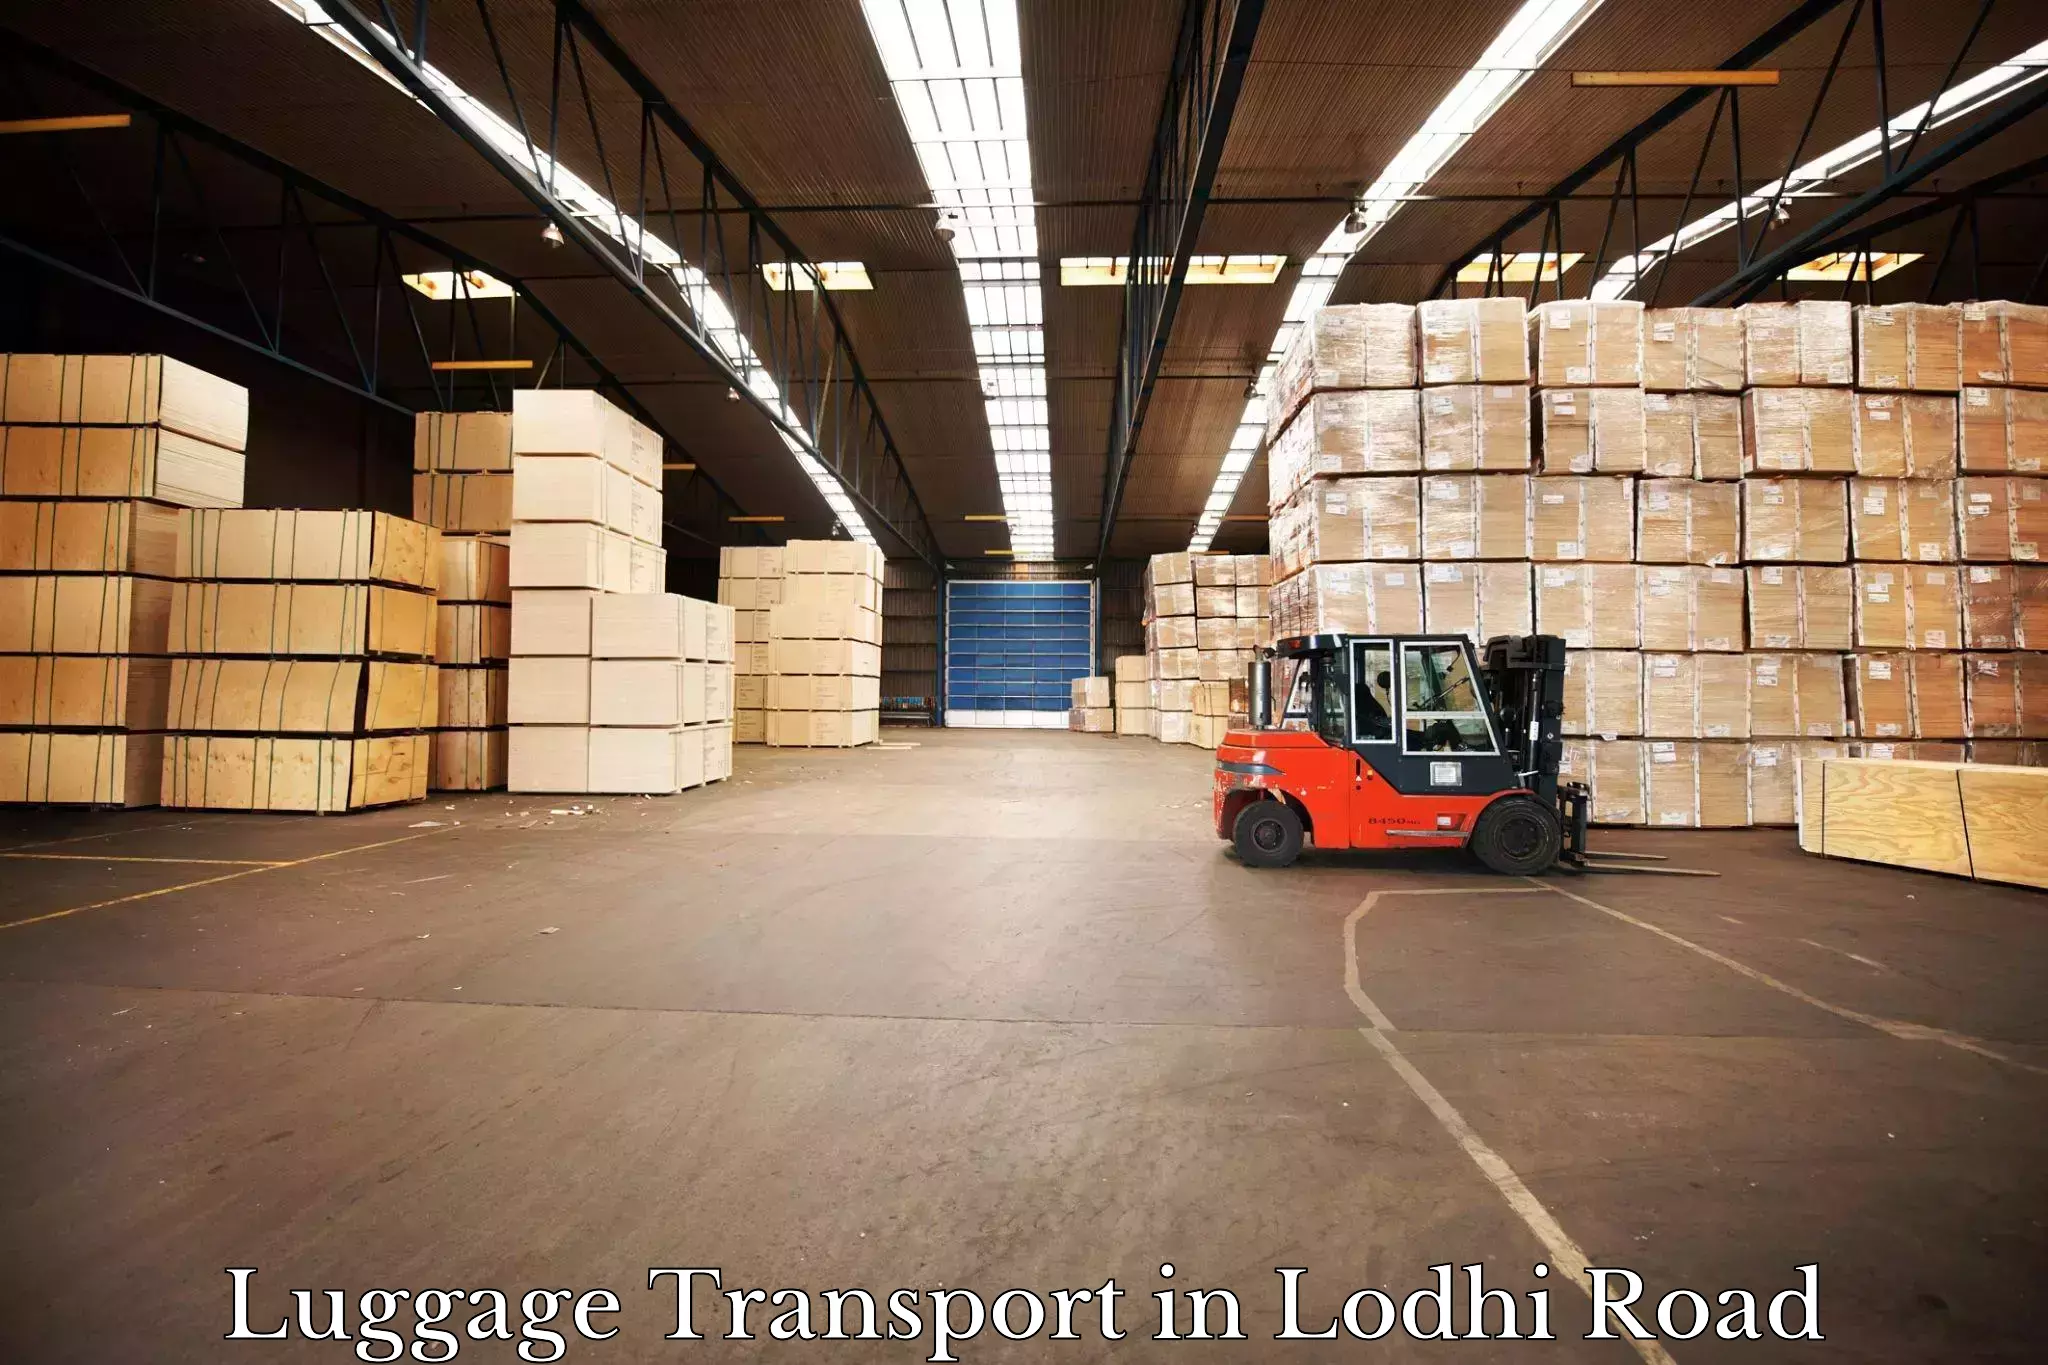 Luggage transport service in Lodhi Road